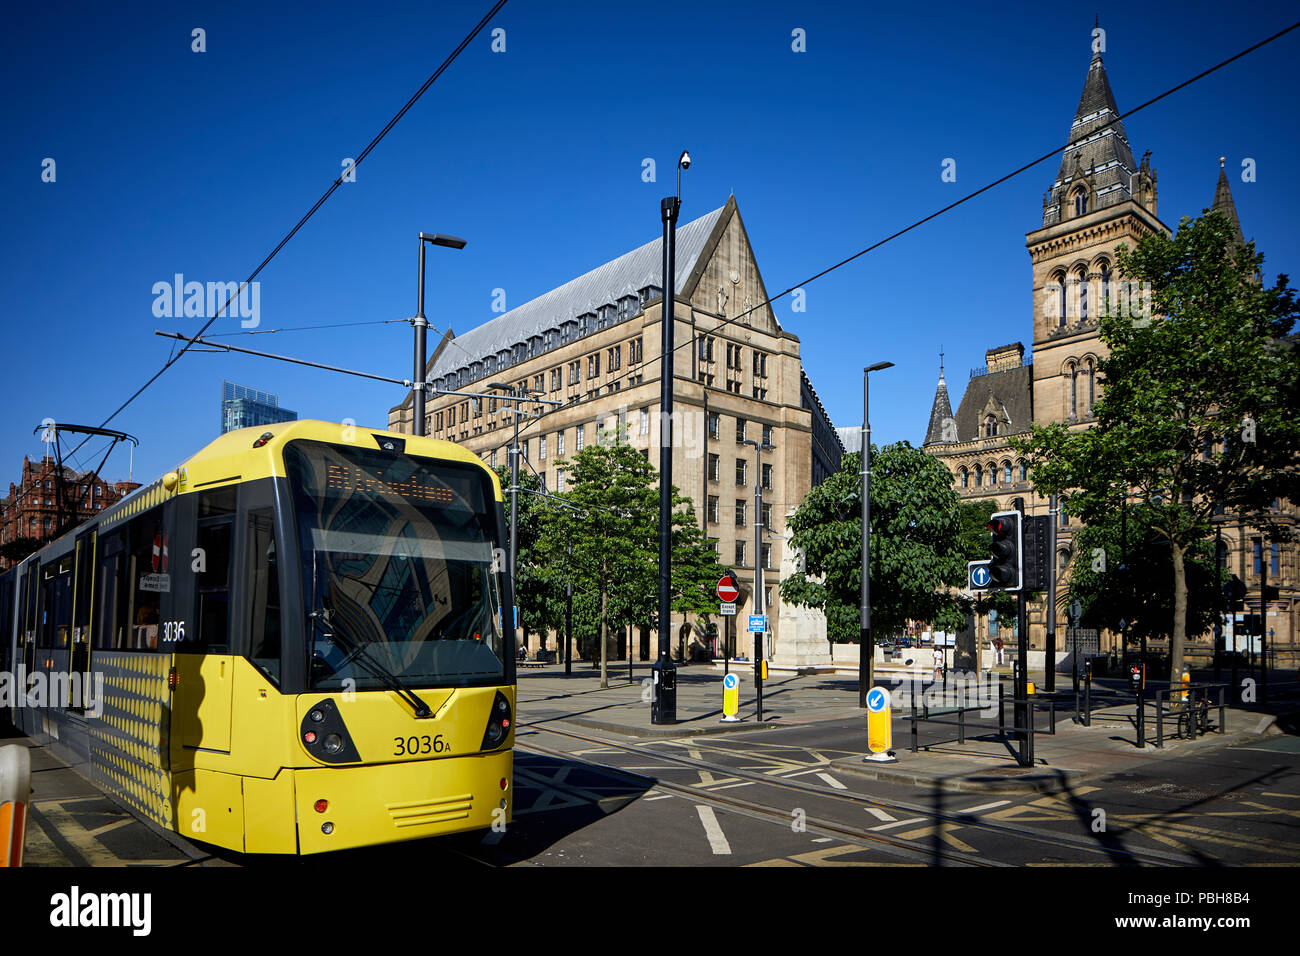 Metrolink tram at Peters Square, Town hall,   Manchester city centre Stock Photo